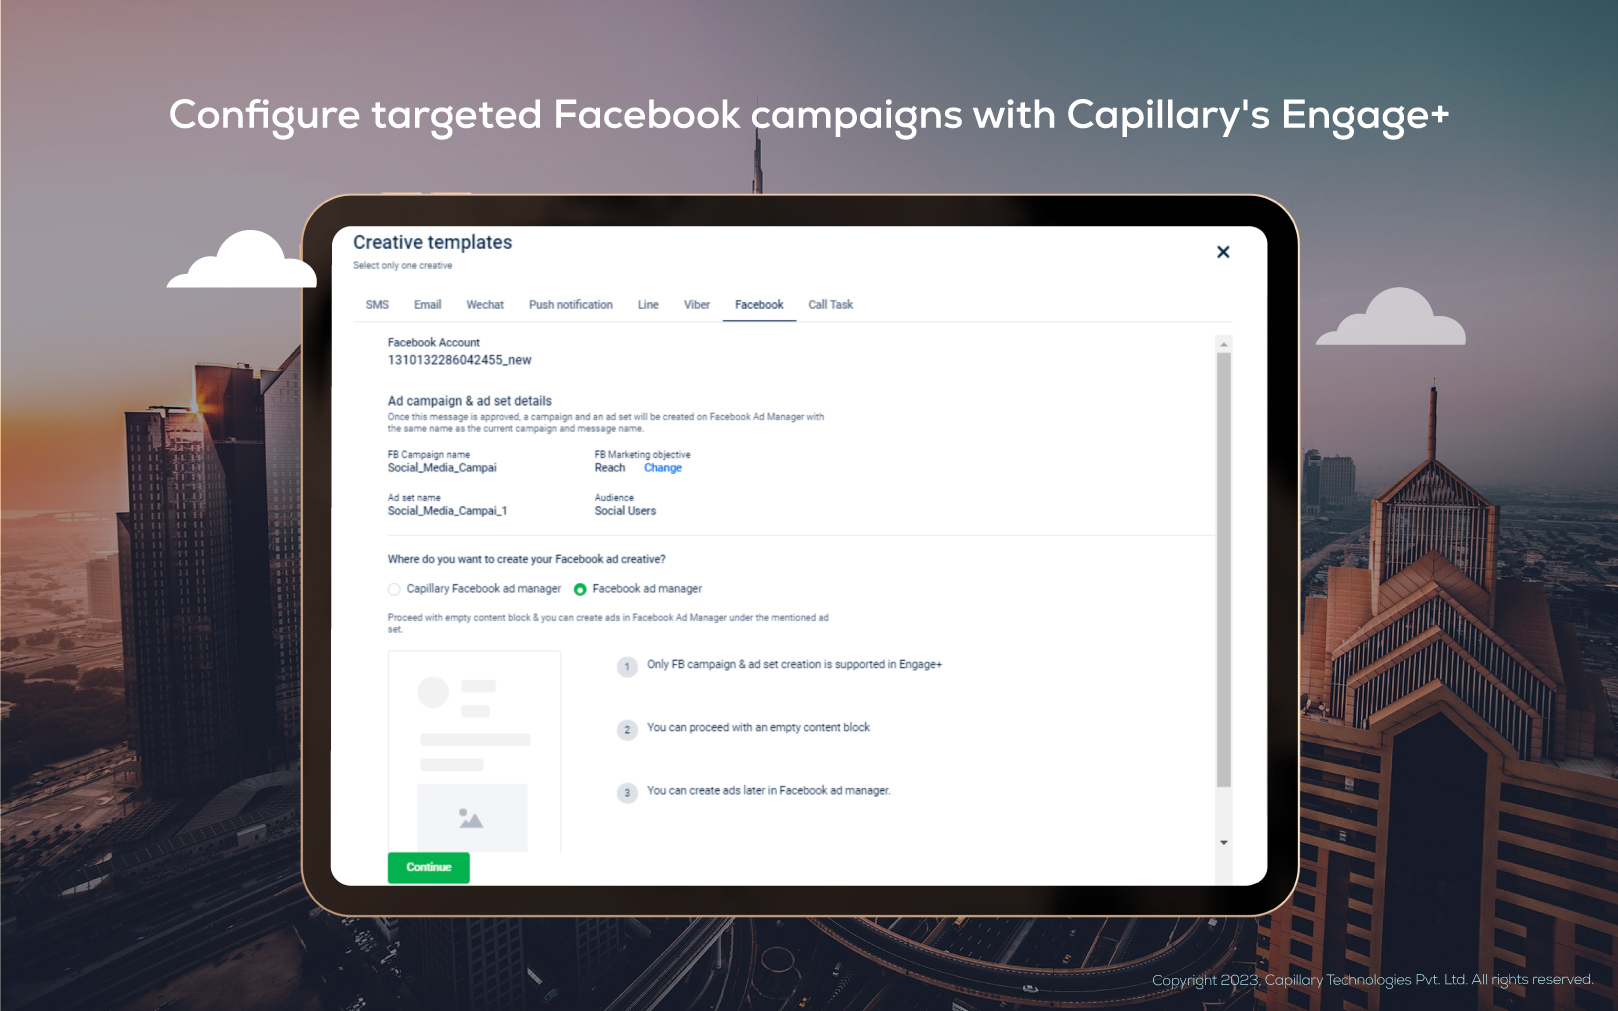 Configure targeted Facebook campaigns with Capillary's Engage+